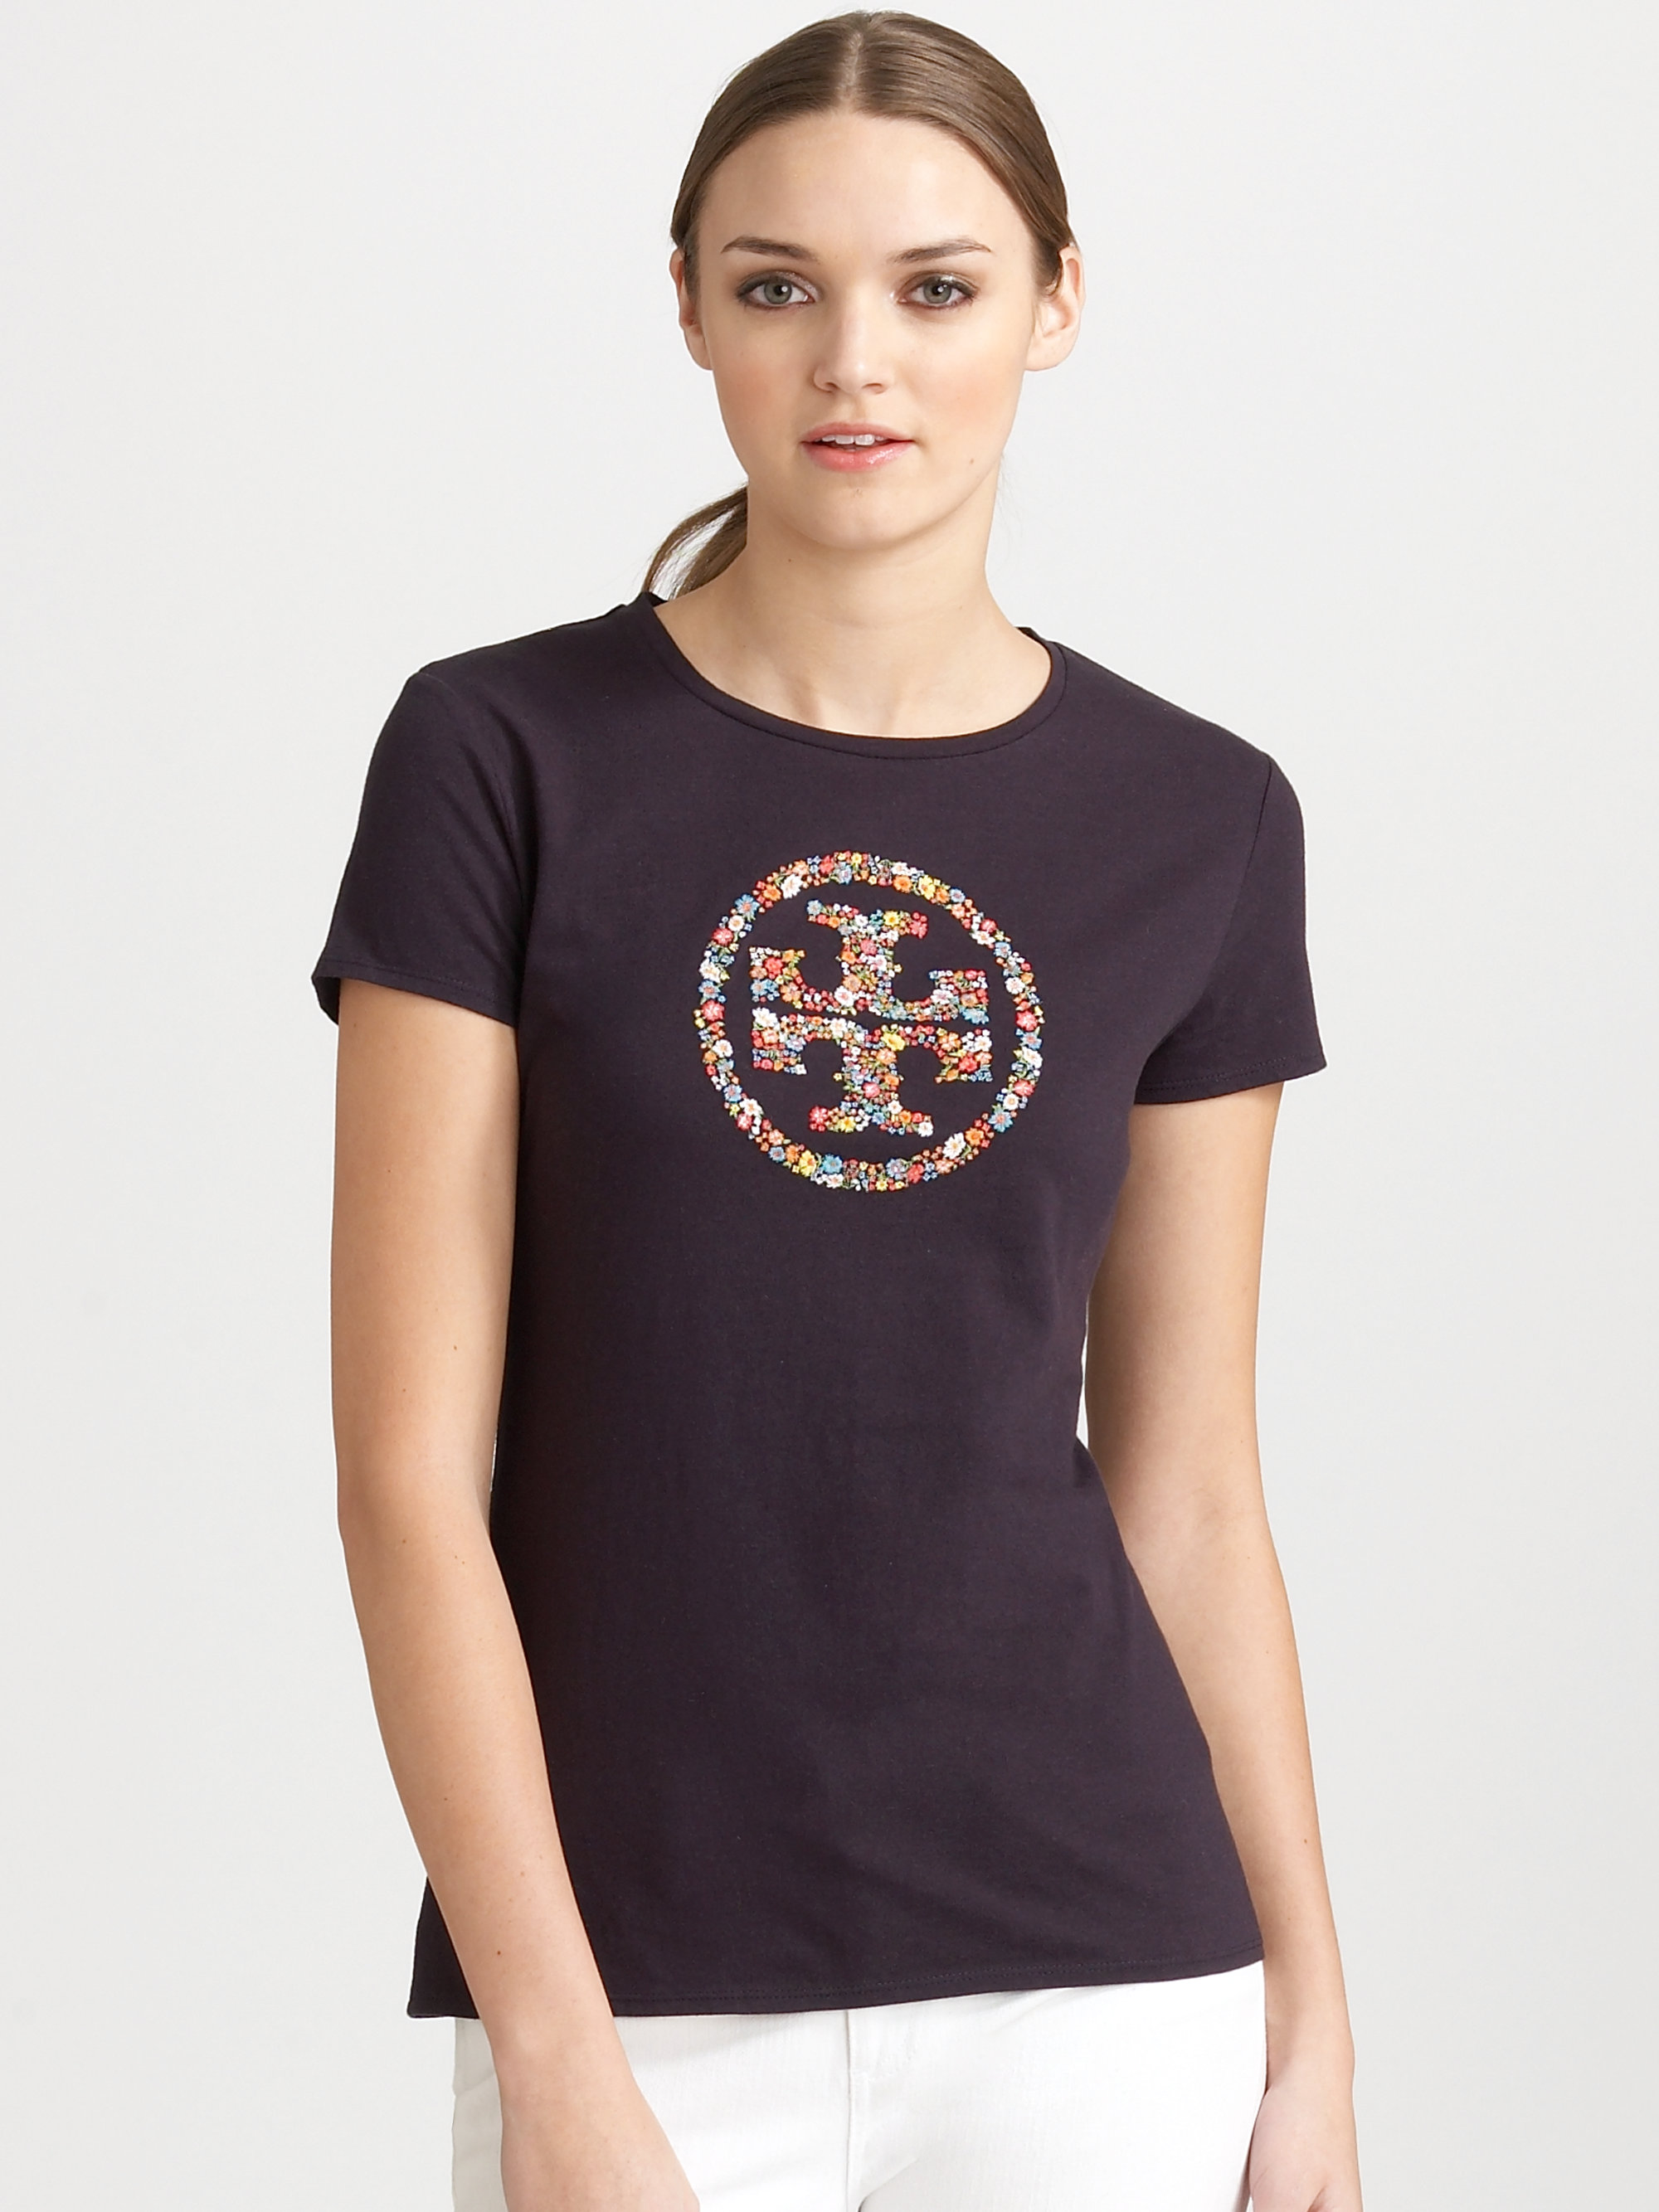 Tory Burch Embroidered Logo Tshirt in Blue